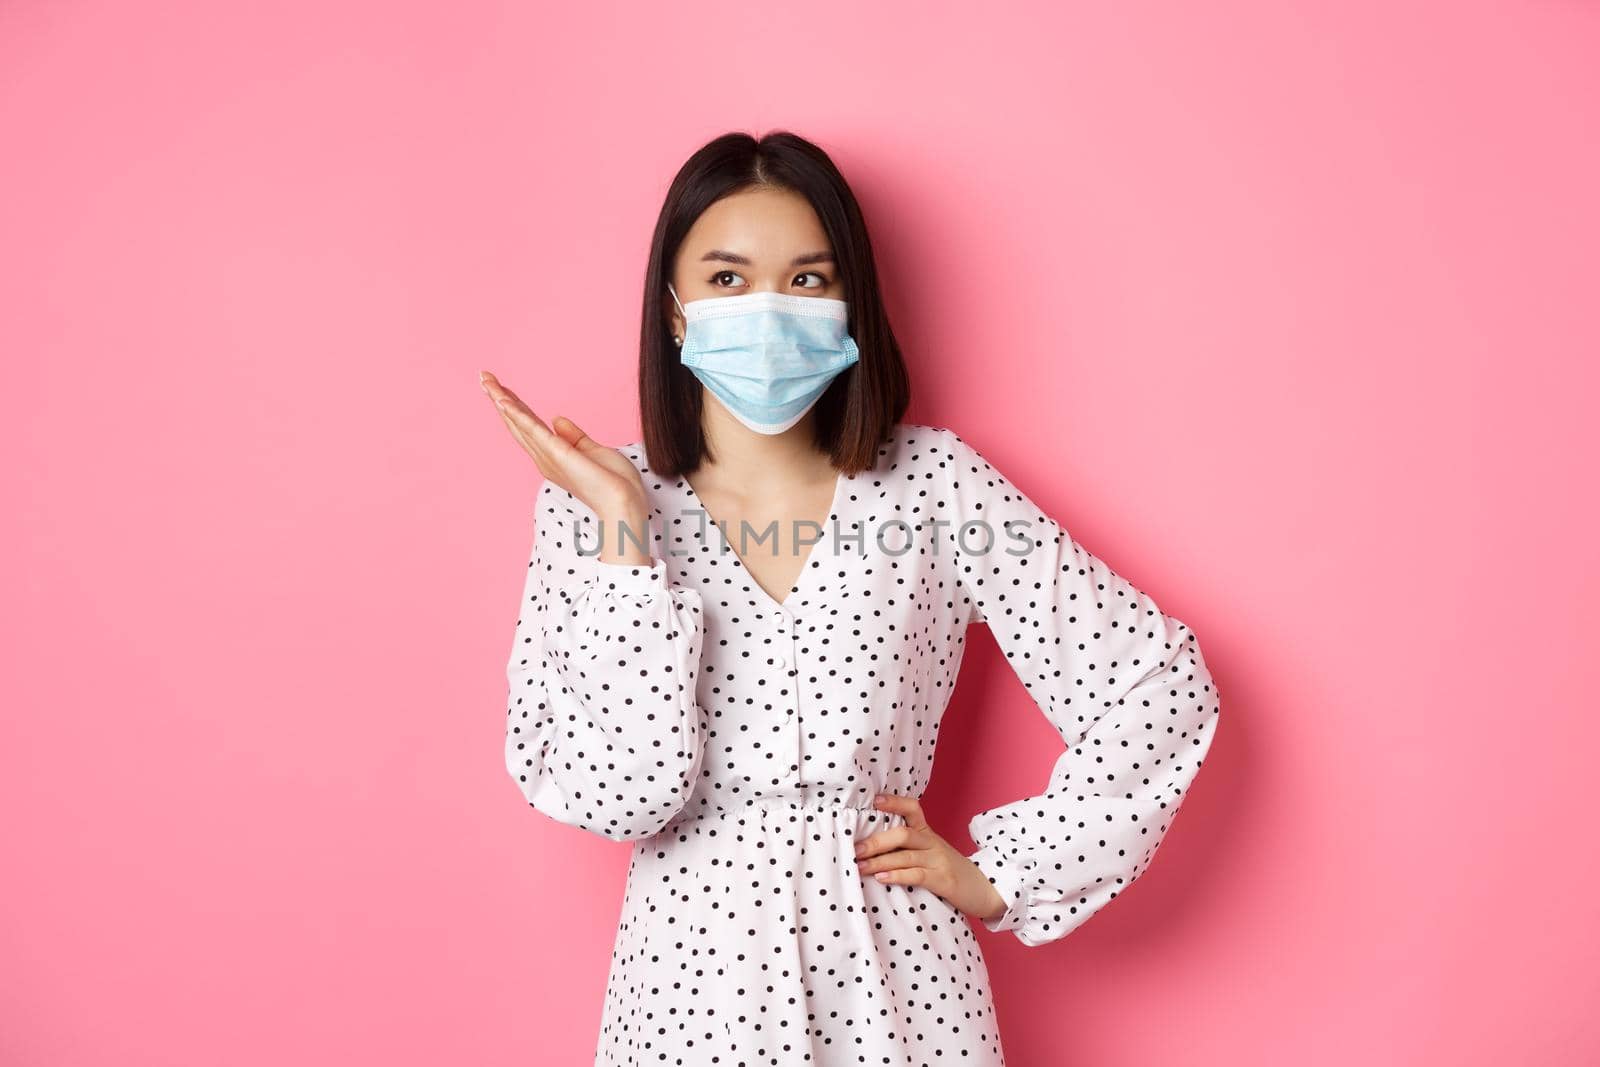 Covid-19, quarantine and lifestyle concept. Lovely asian woman in face mask raising hand, standing in dress over pink background.